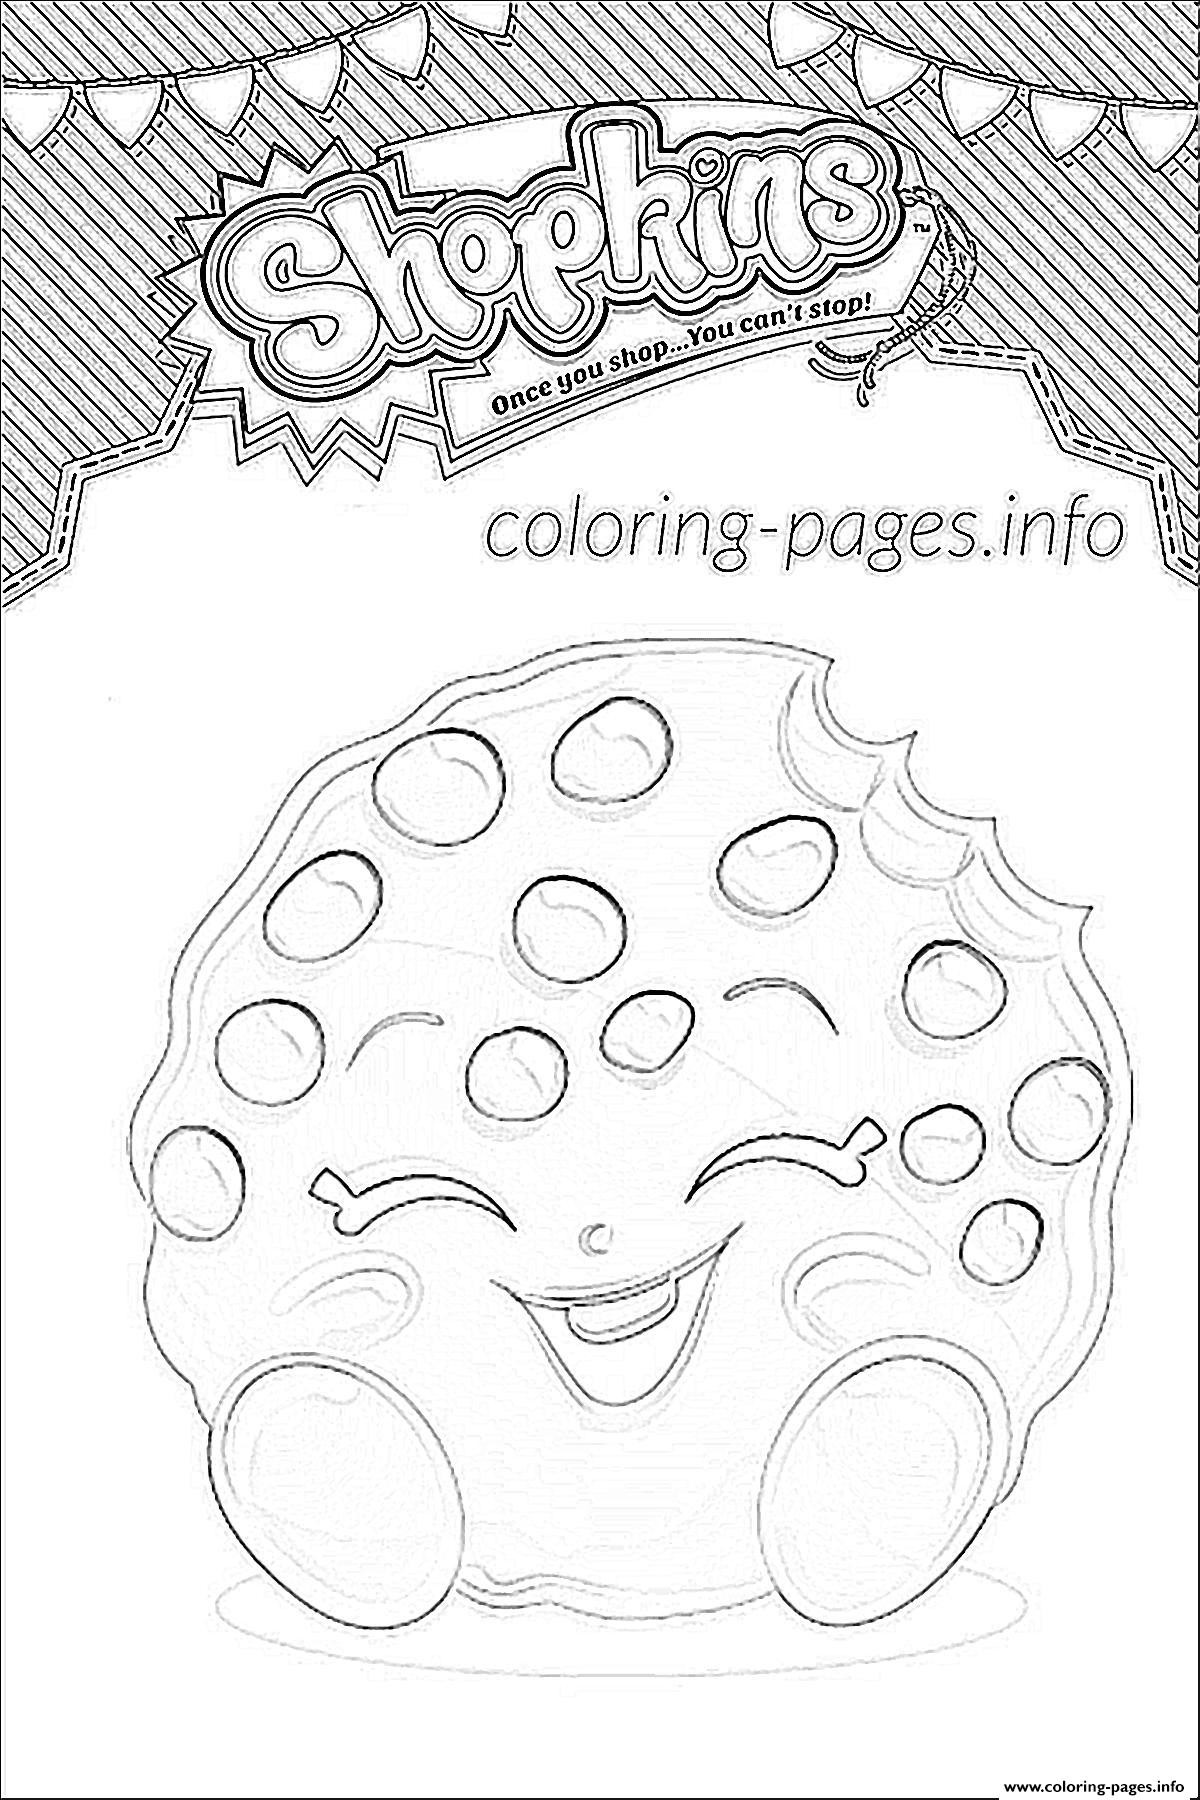 Shopkins Shoppies Coloring Pages at GetColorings.com ...